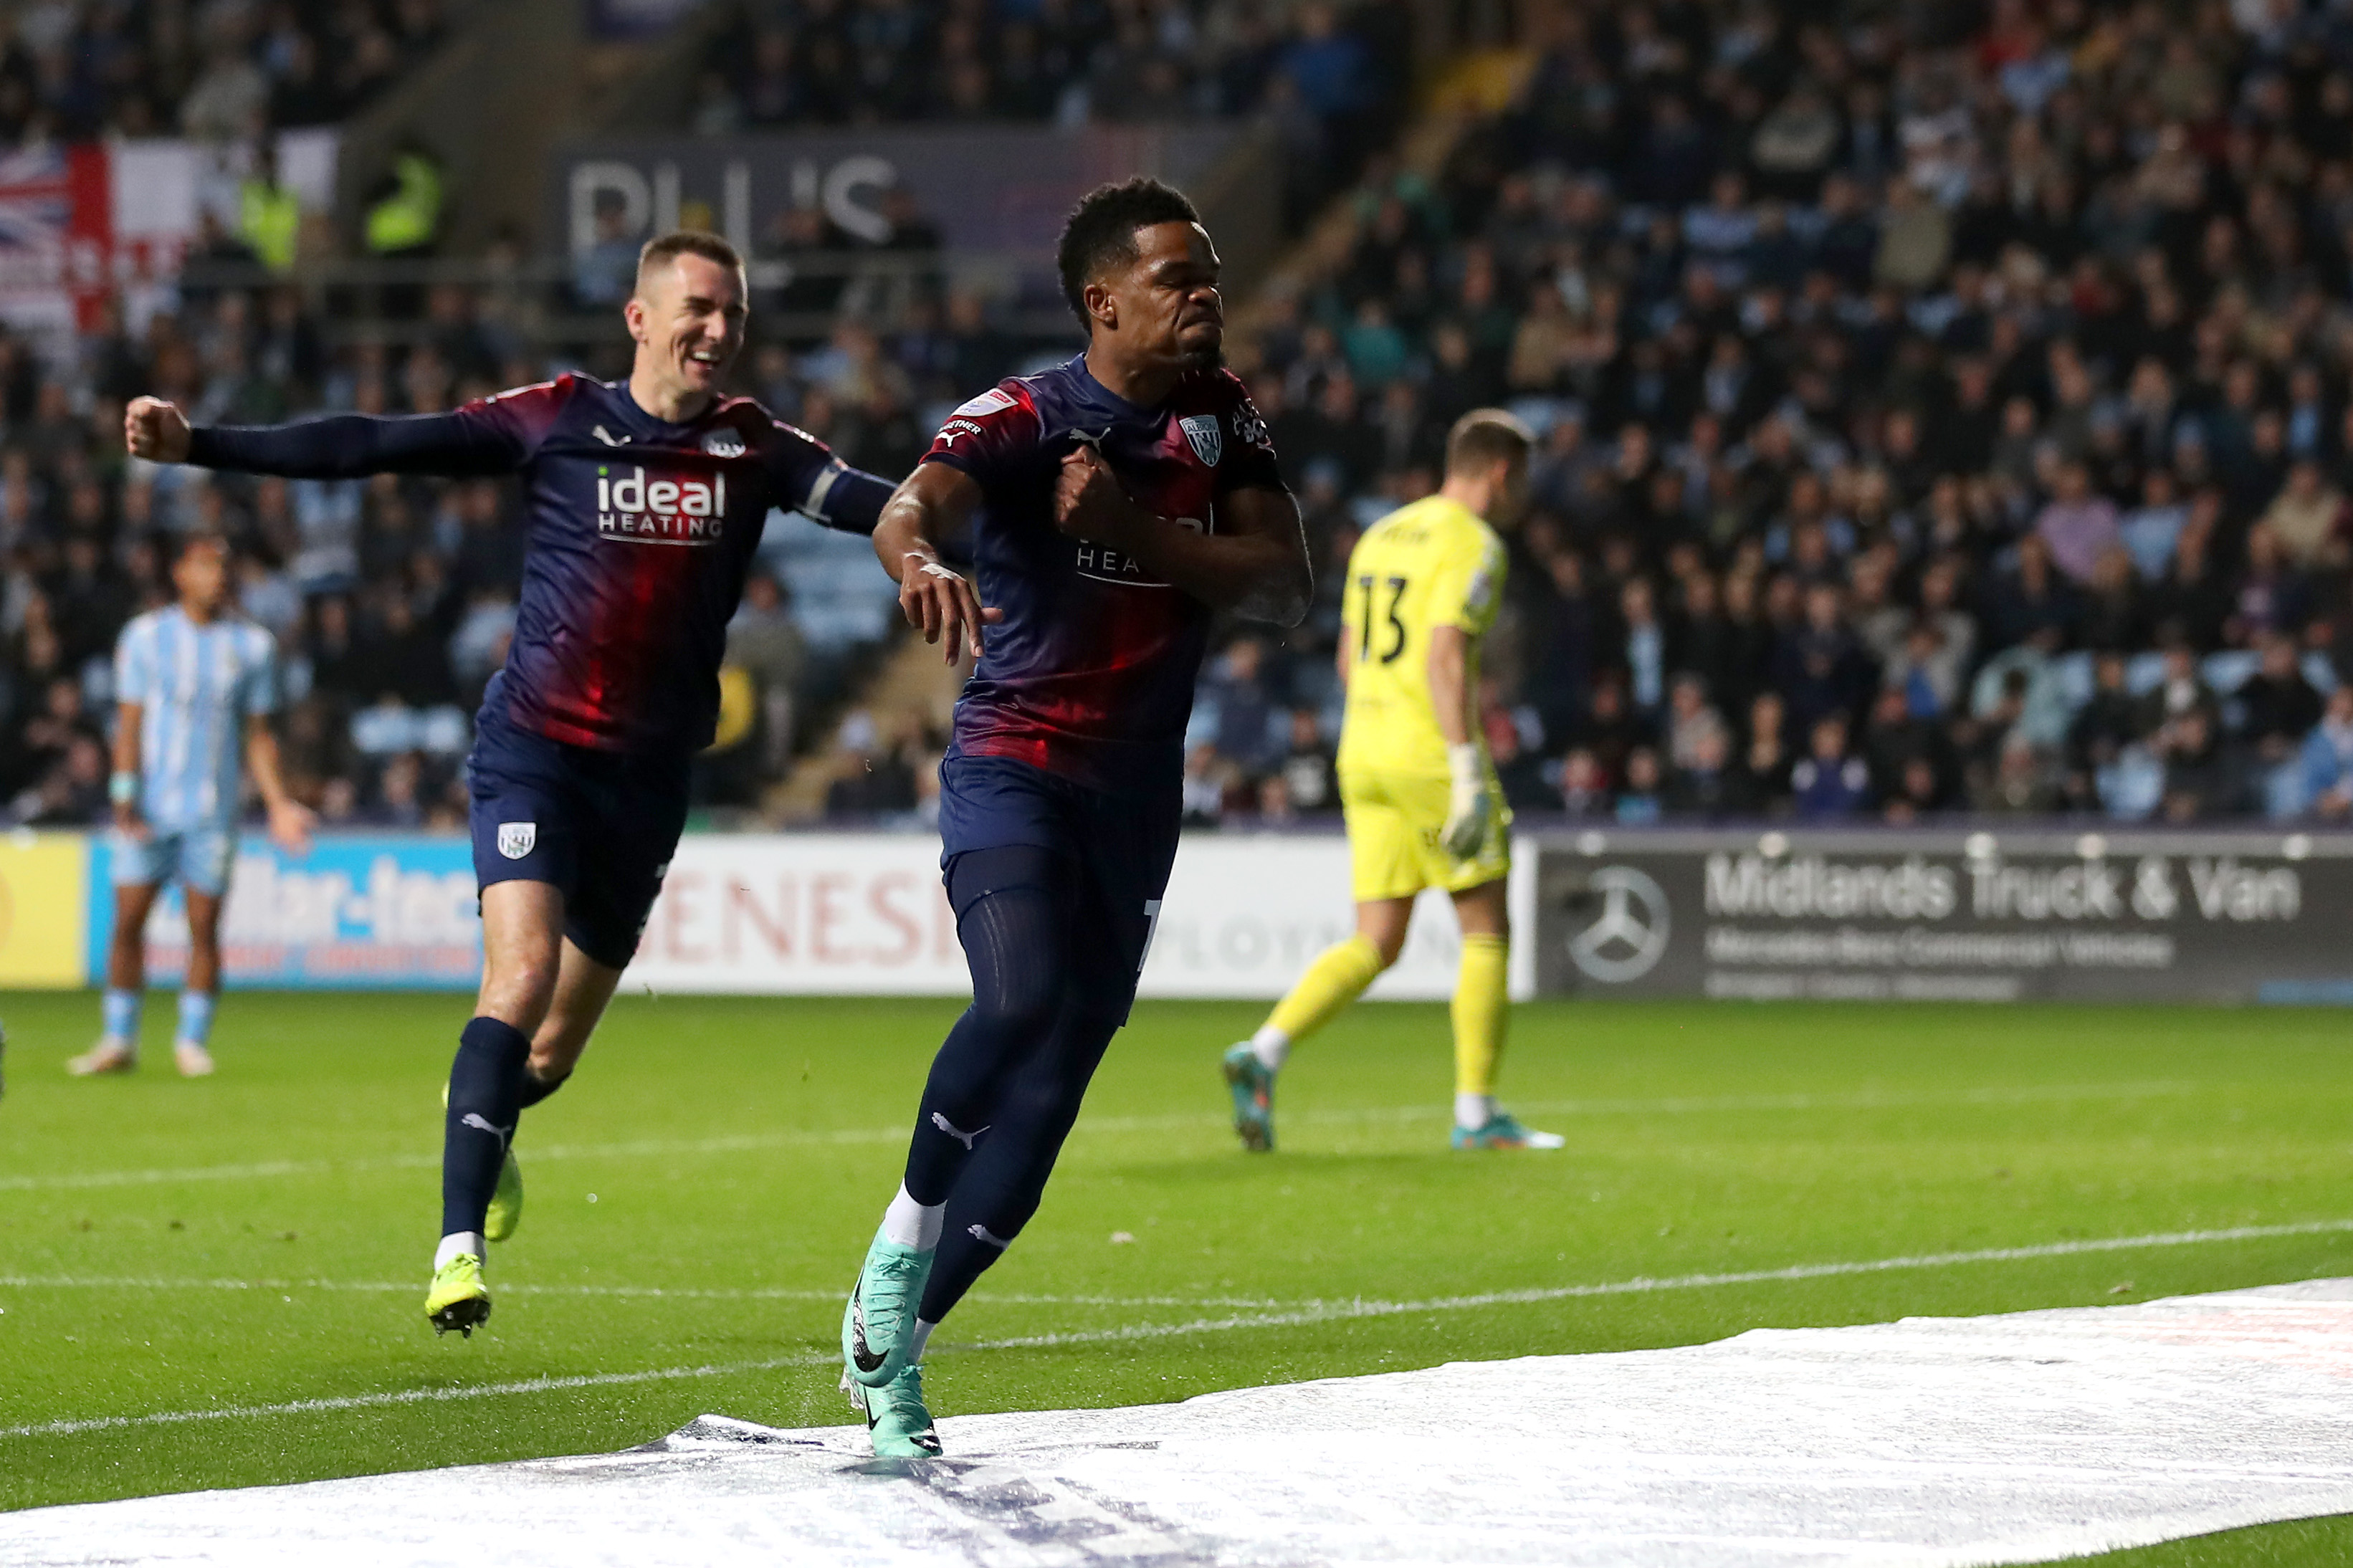 Grady Diangana celebrates scoring against Coventry City at the CBS Arena with Jed Wallace closely behind him